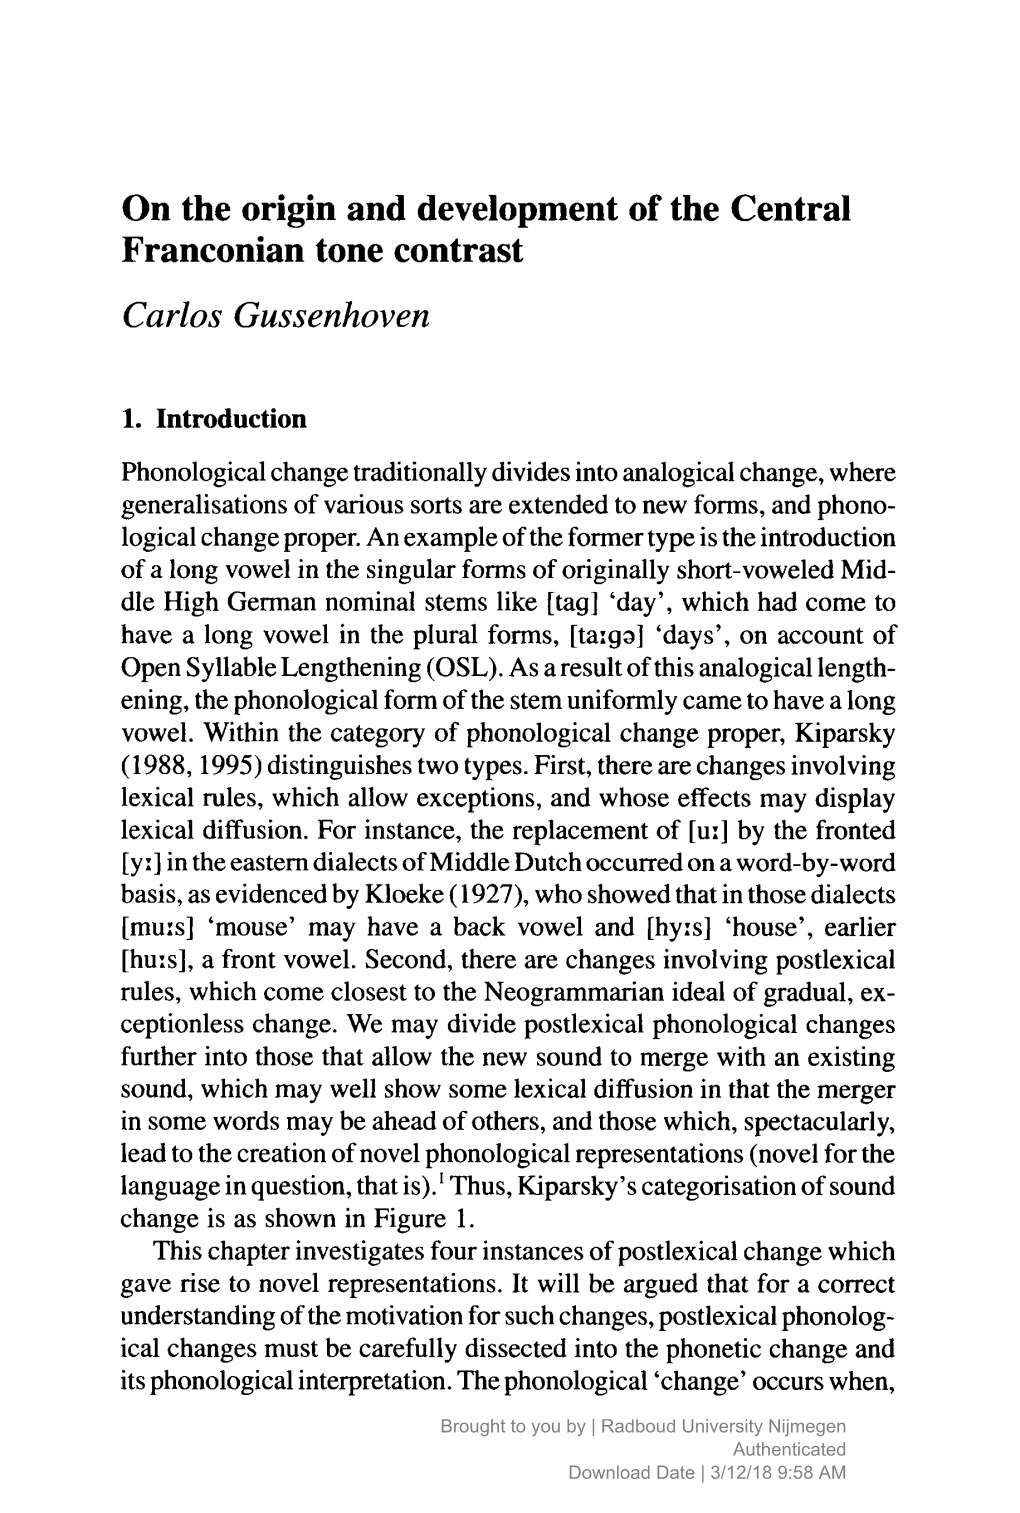 On the Origin and Development of the Central Franconian Tone Contrast Carlos Gussenhoven